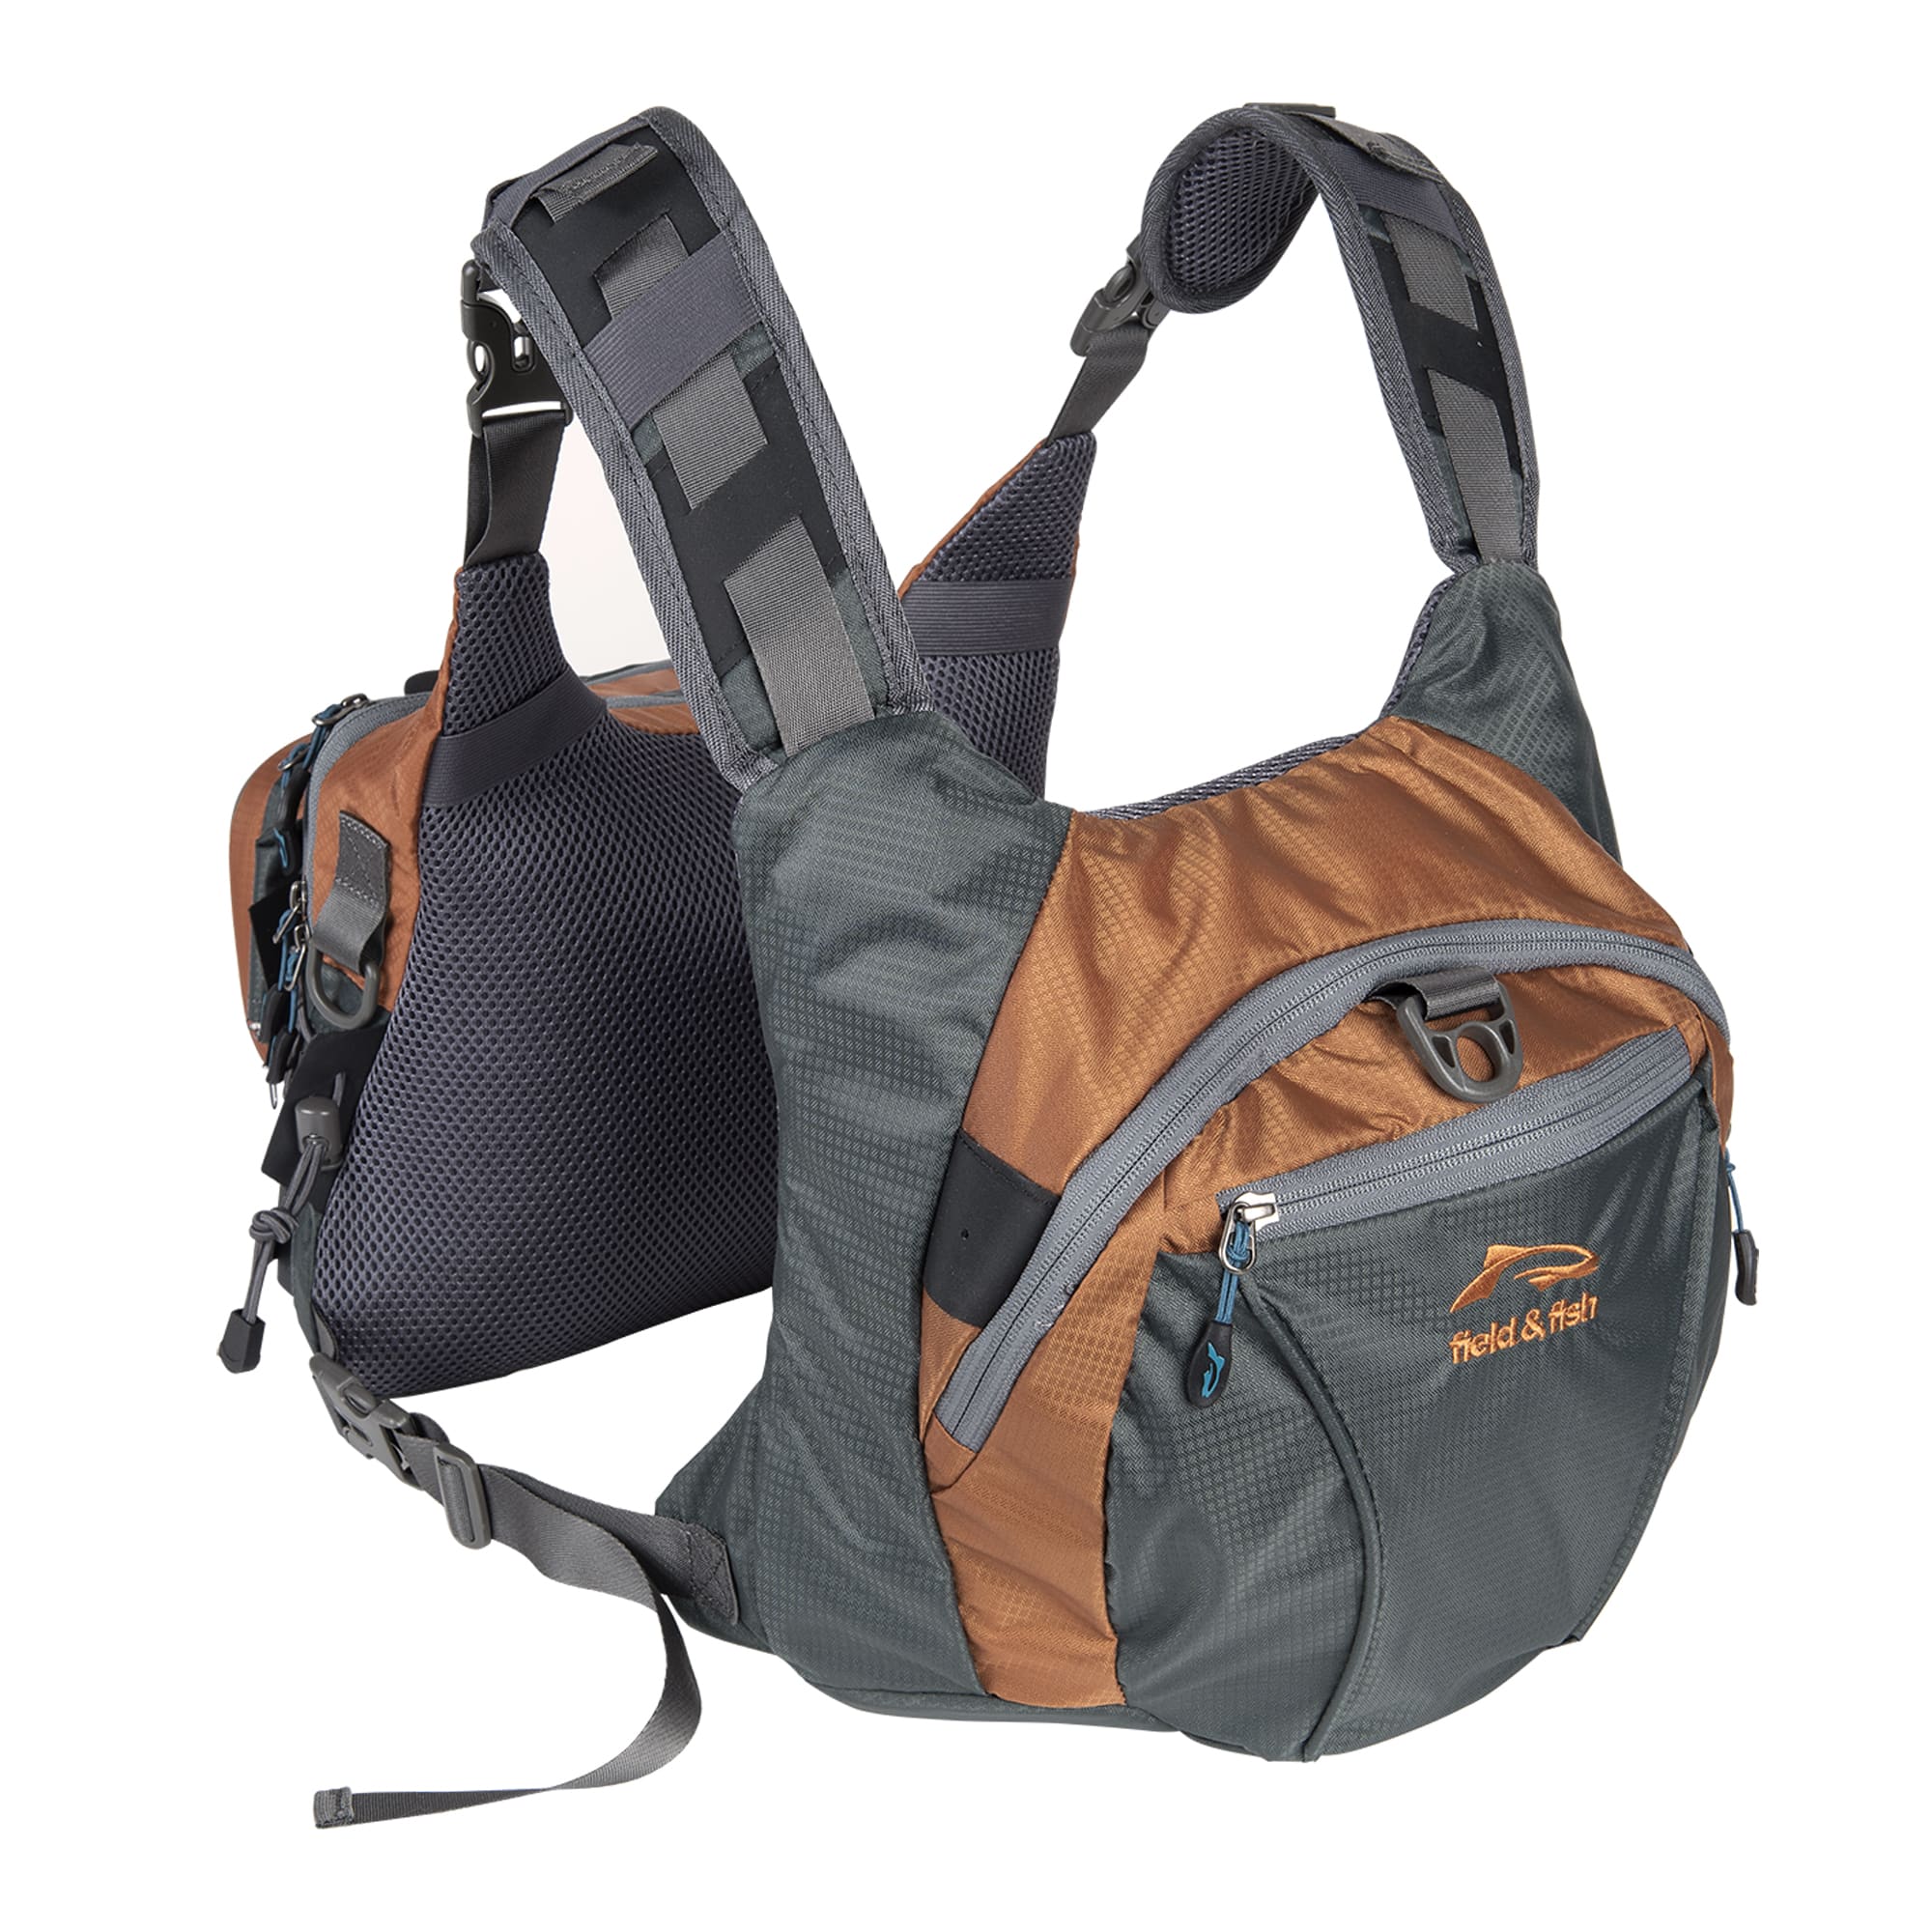 Chest Pack backpack - Field & Fish